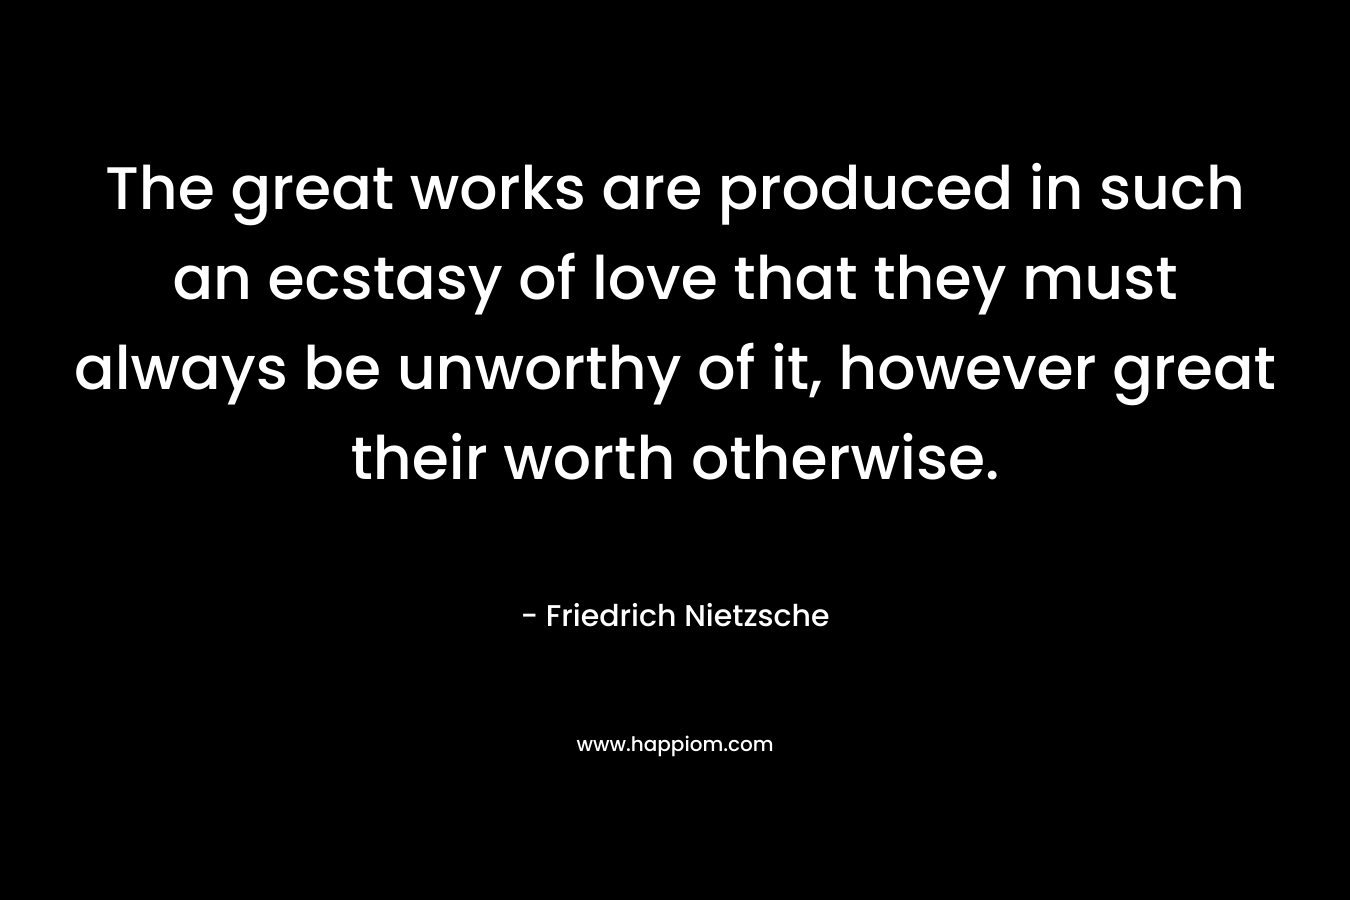 The great works are produced in such an ecstasy of love that they must always be unworthy of it, however great their worth otherwise.